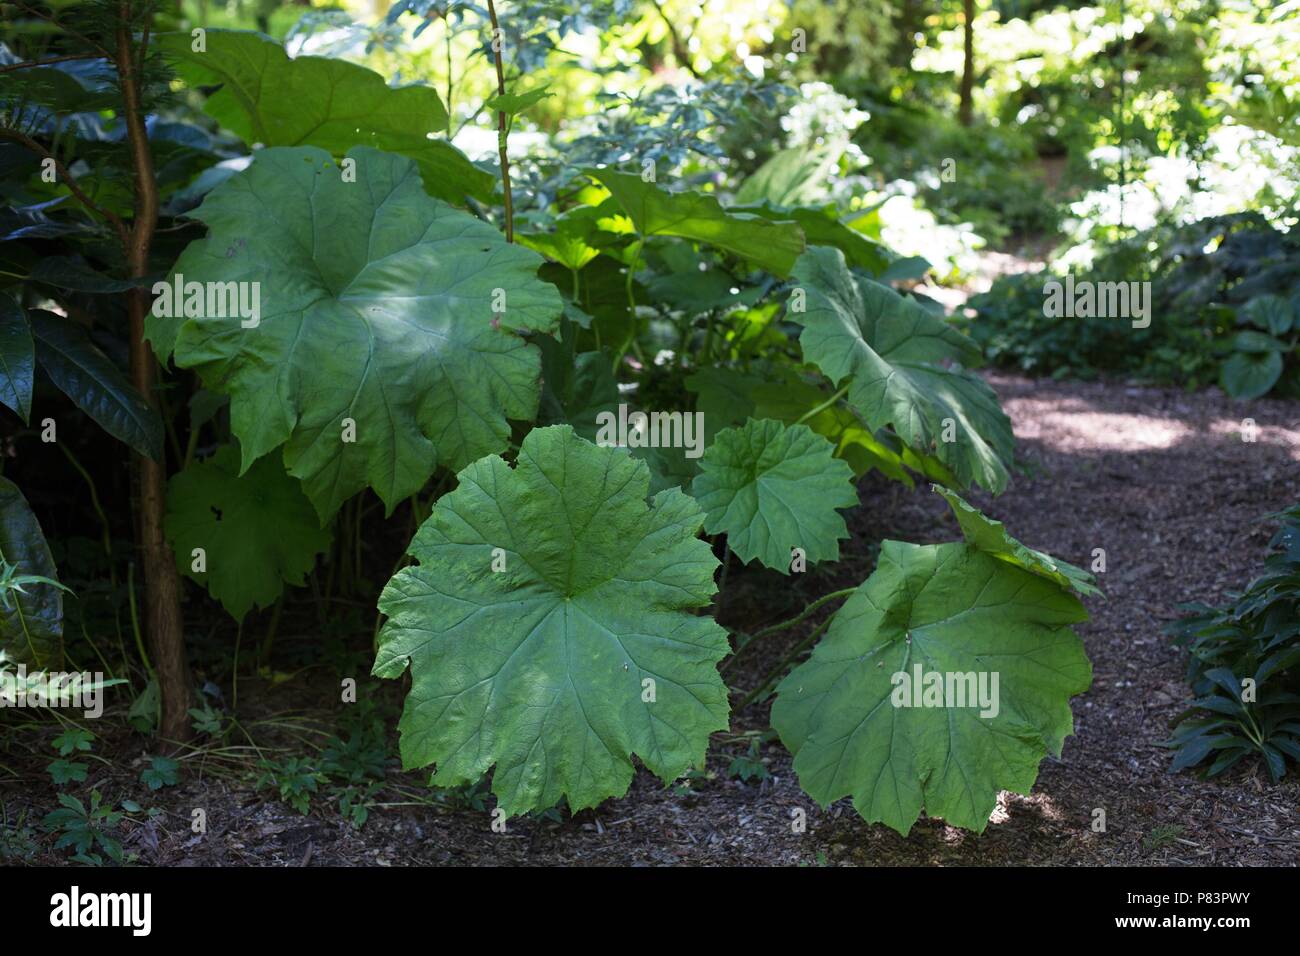 A plant with giant green leaves Stock Photo - Alamy